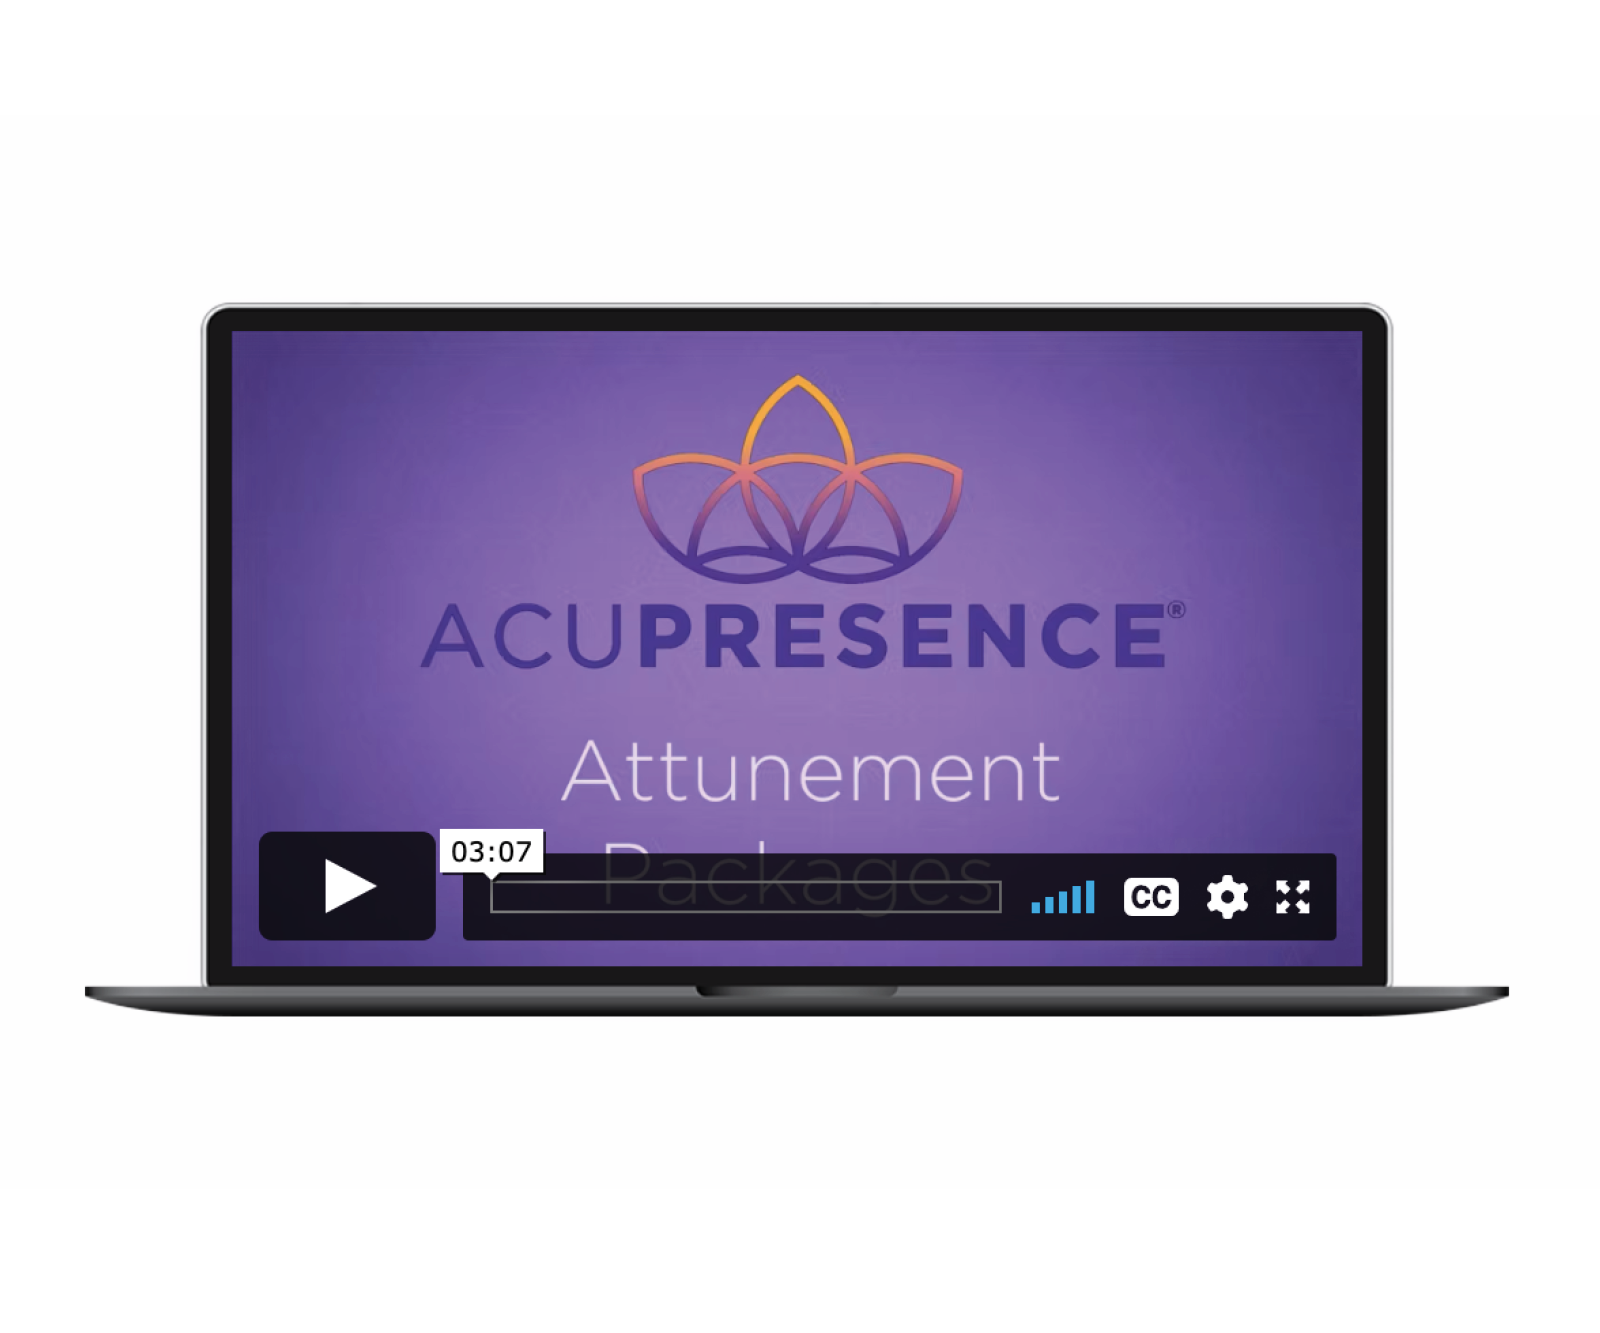   AcuPresence Attunements  are like Do-It-Yourself (DIY) Acupuncture Sessions. We offer over 75 Attunement Packages in our&nbsp;Harmonizing and Hexagram Series.  Explore Here  